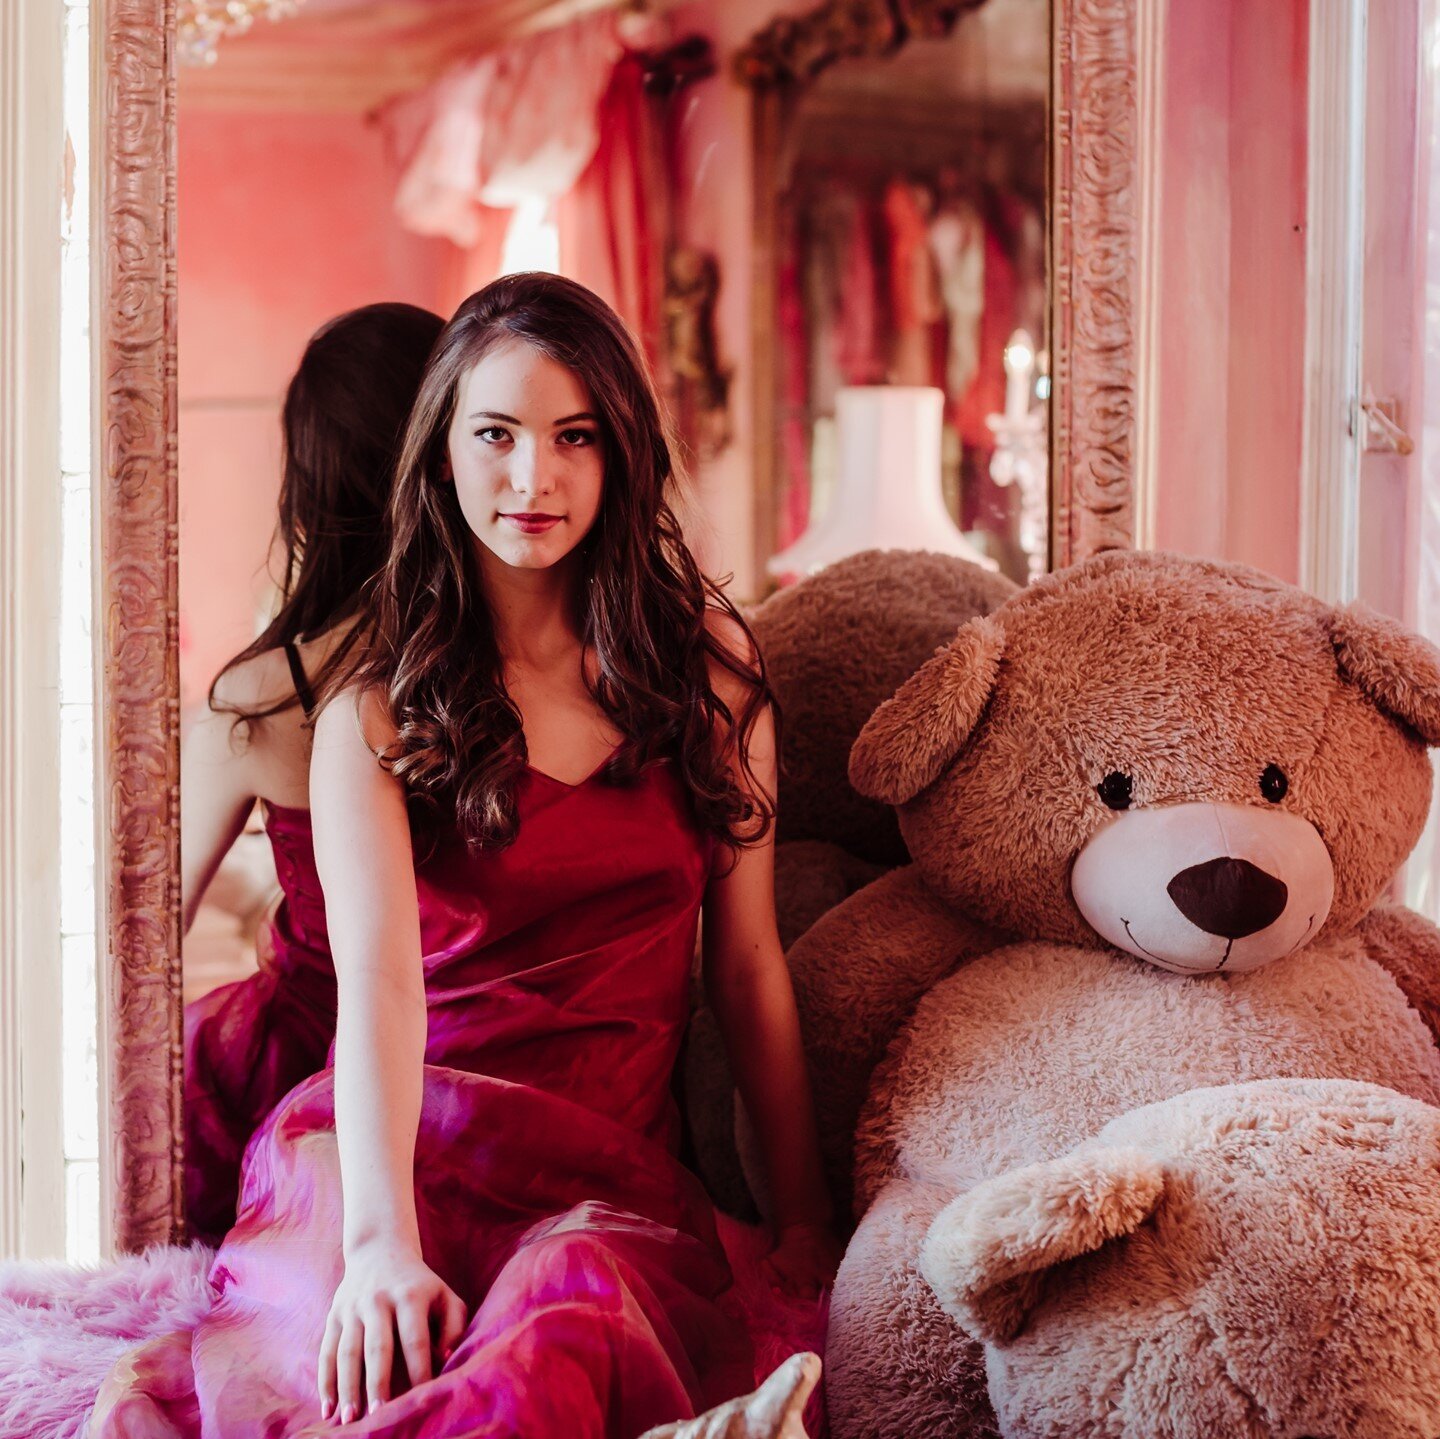 Had such a great time shooting at @ragdollpinkpalace with the most elegant @gianna_hoferrr.⁠
⁠
I don't know a place that is more pink and girly that this one, and yet each room holds a different feel to it. I love shooting there so much! ⁠
⁠
#talente